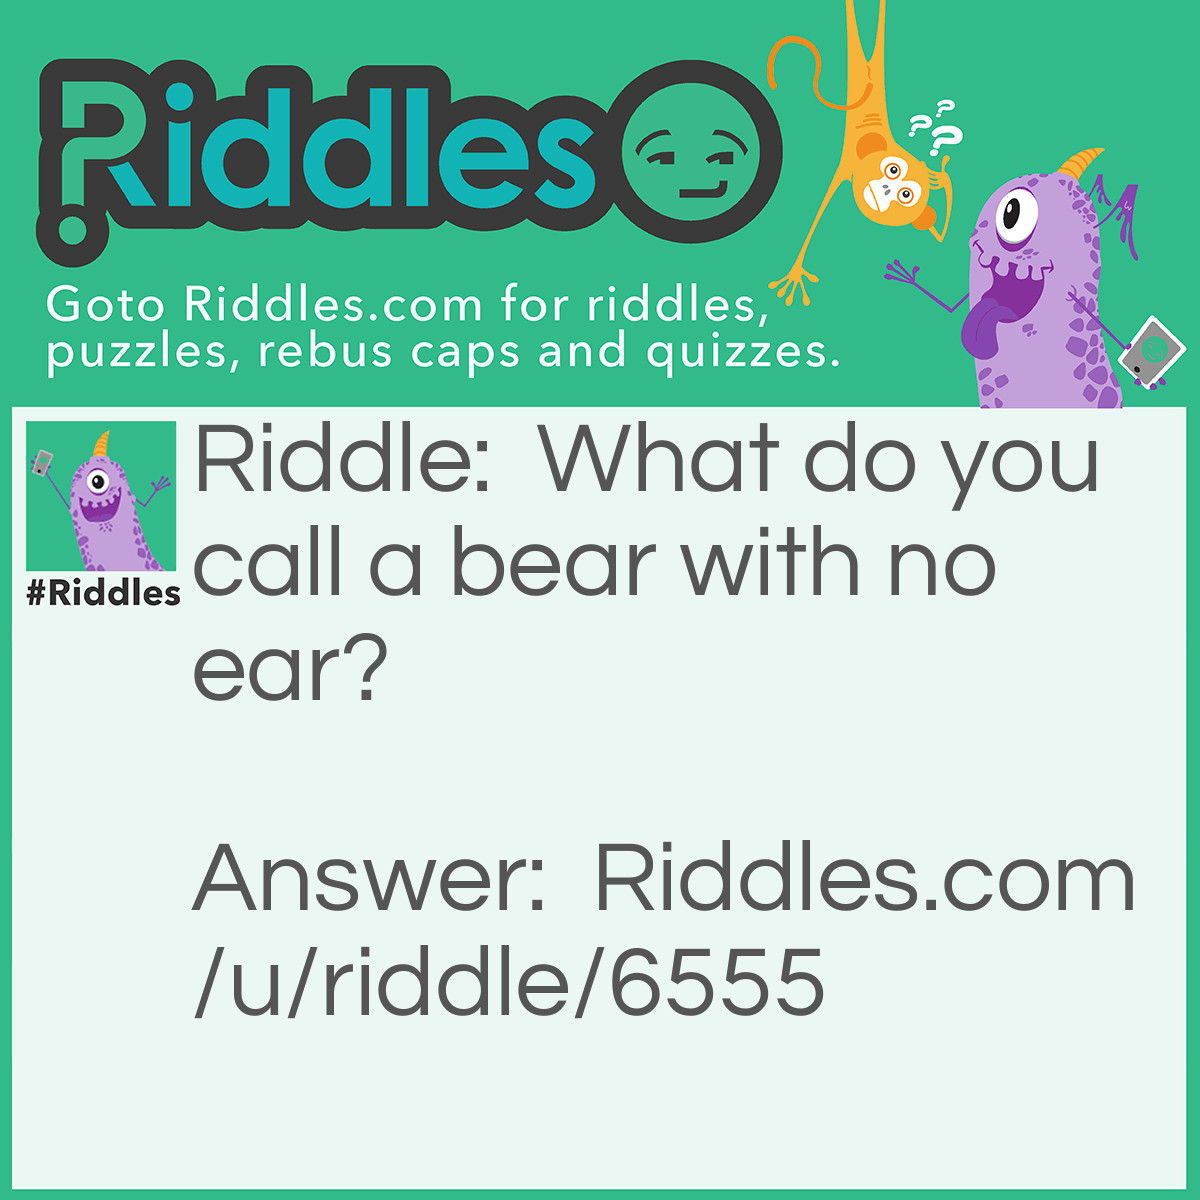 Riddle: What do you call a bear with no ear? Answer: A b!